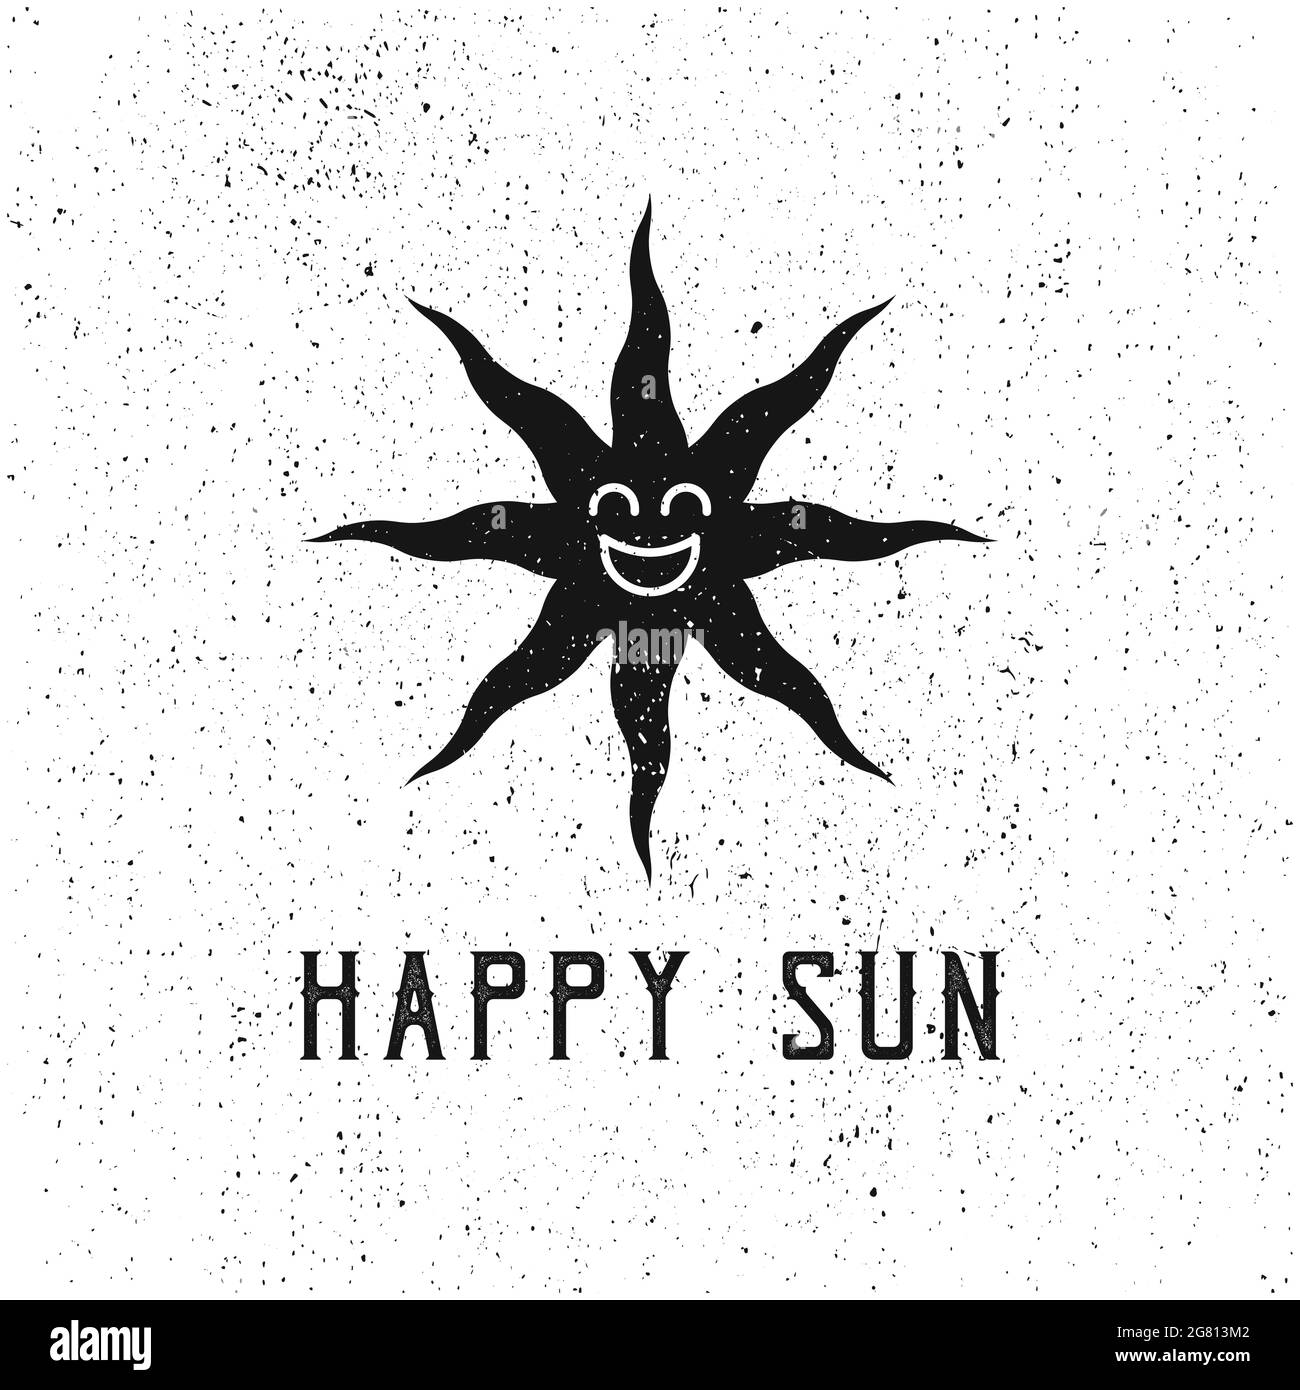 Happy sun face logo. Simple vector illustration of a sun with happy face, in vintage style and grunge texture, isolated on a white background Stock Vector